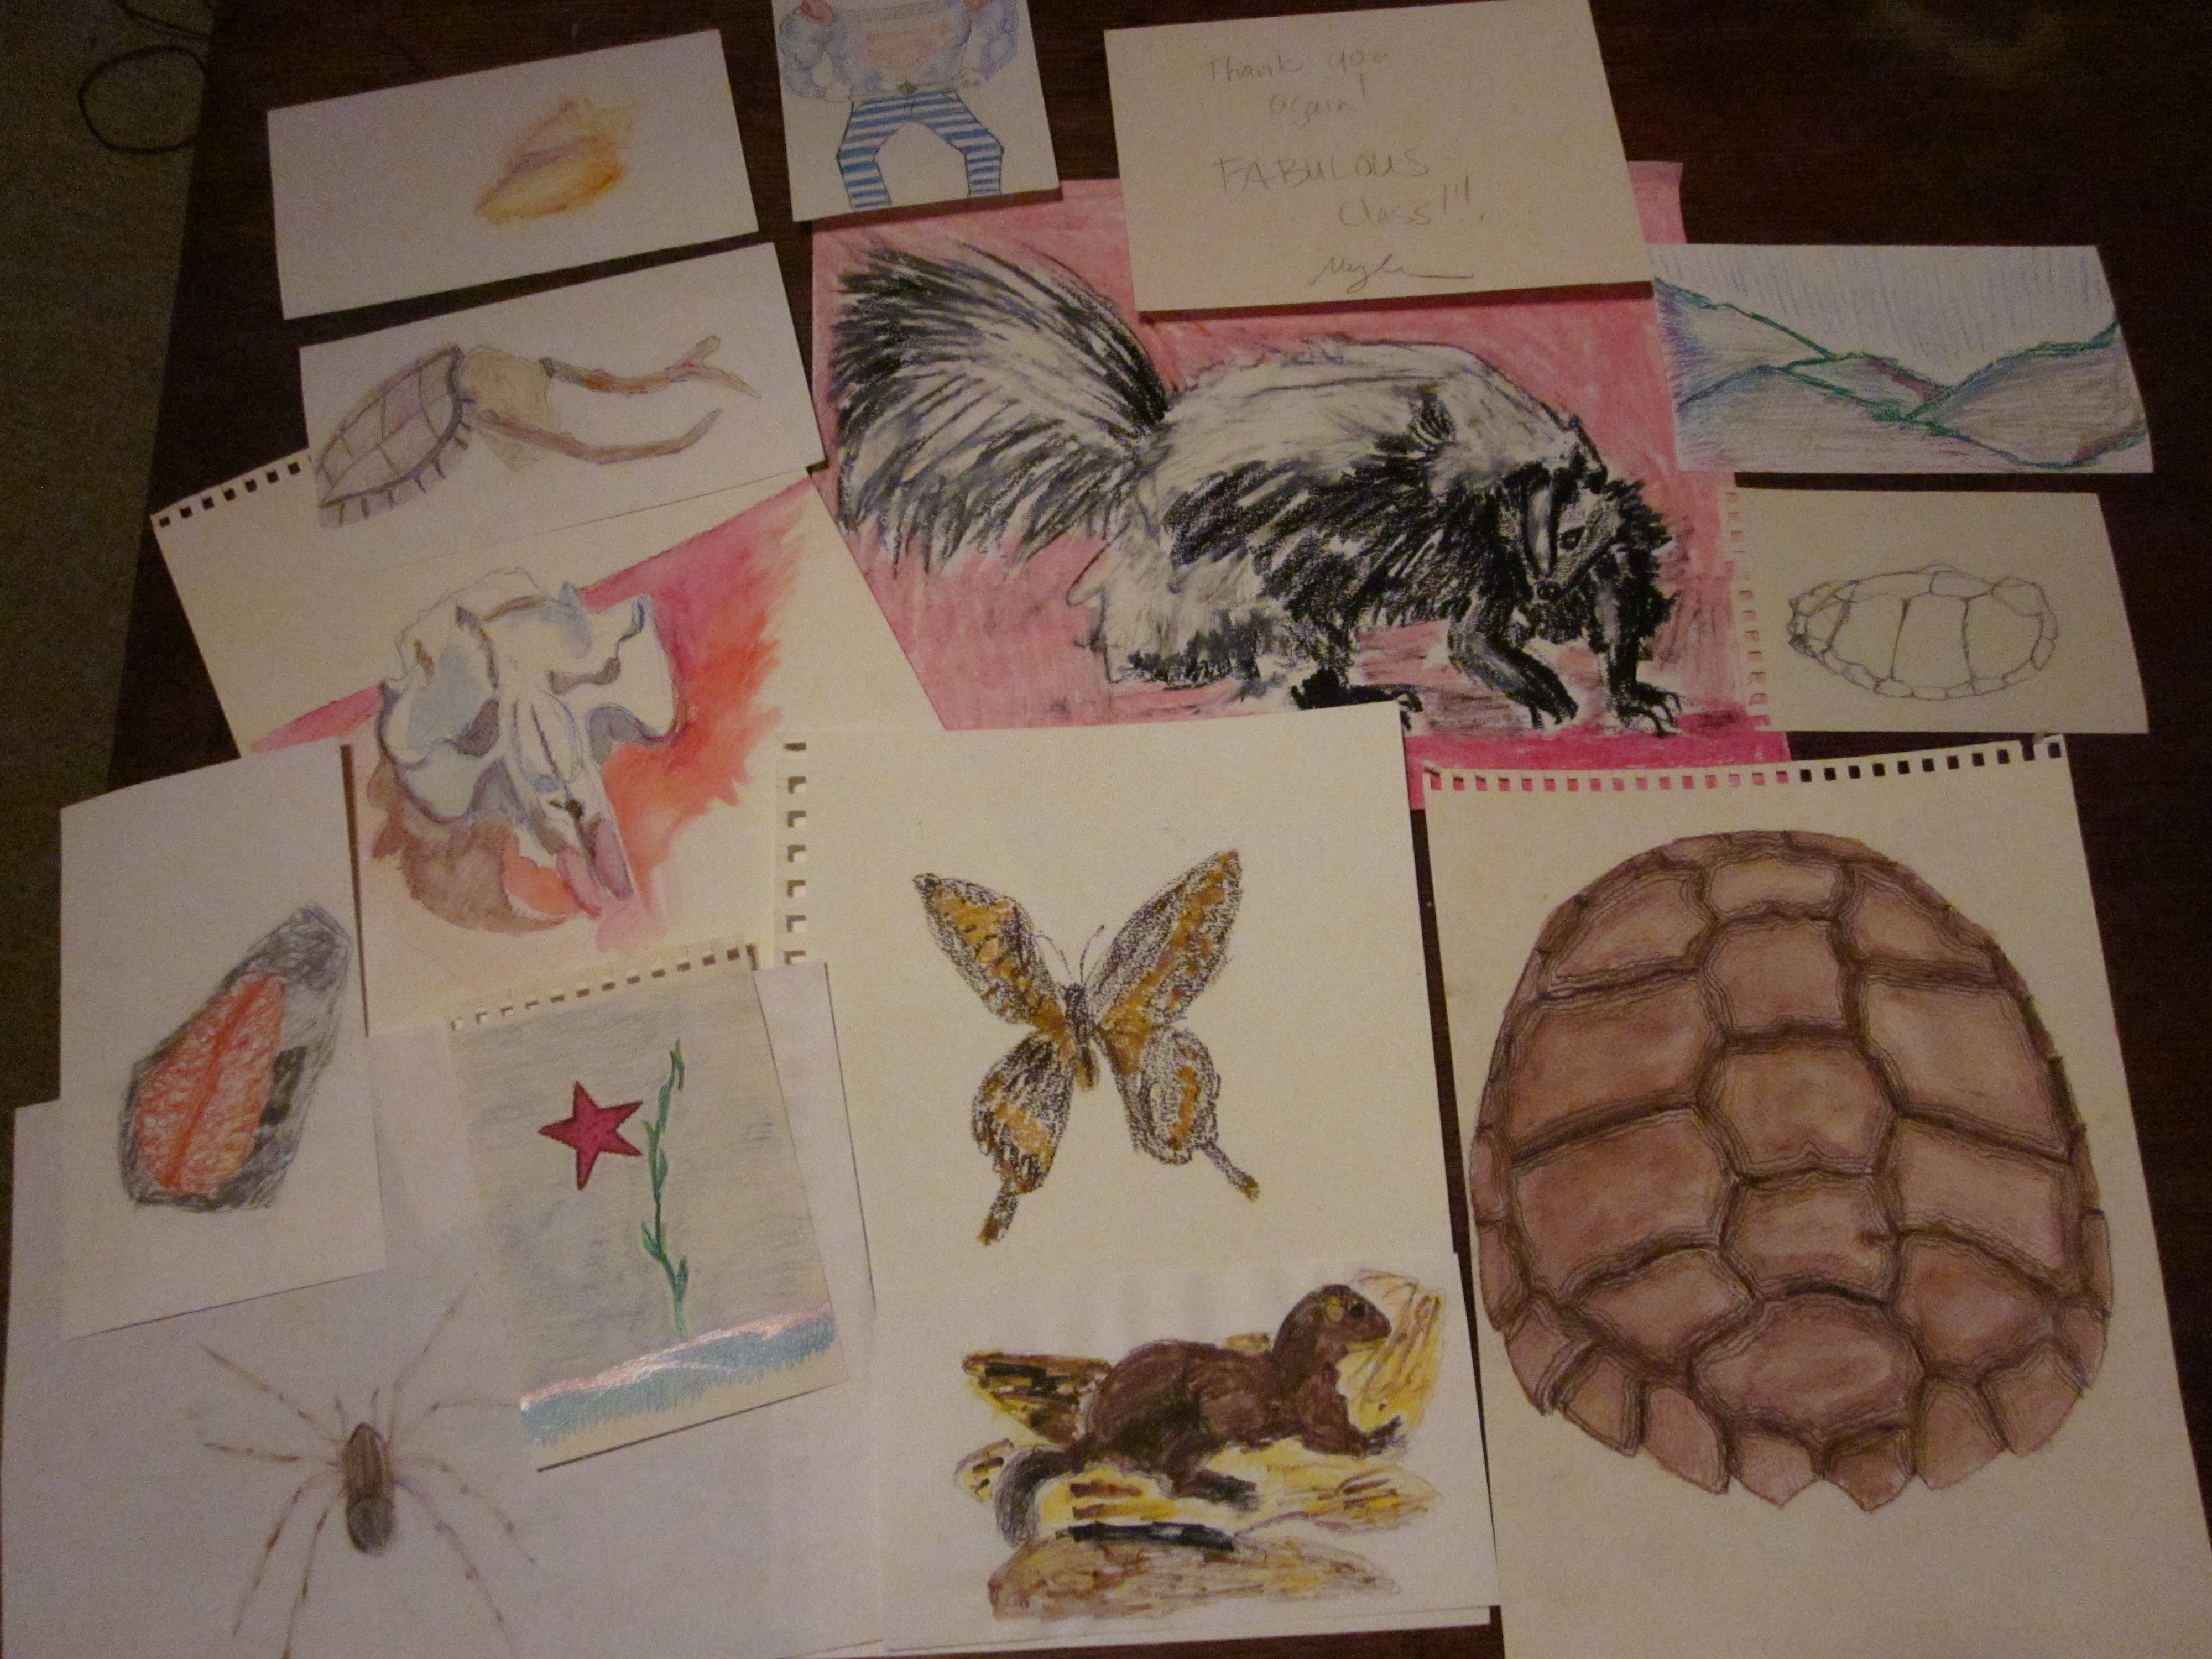 A collection of student art